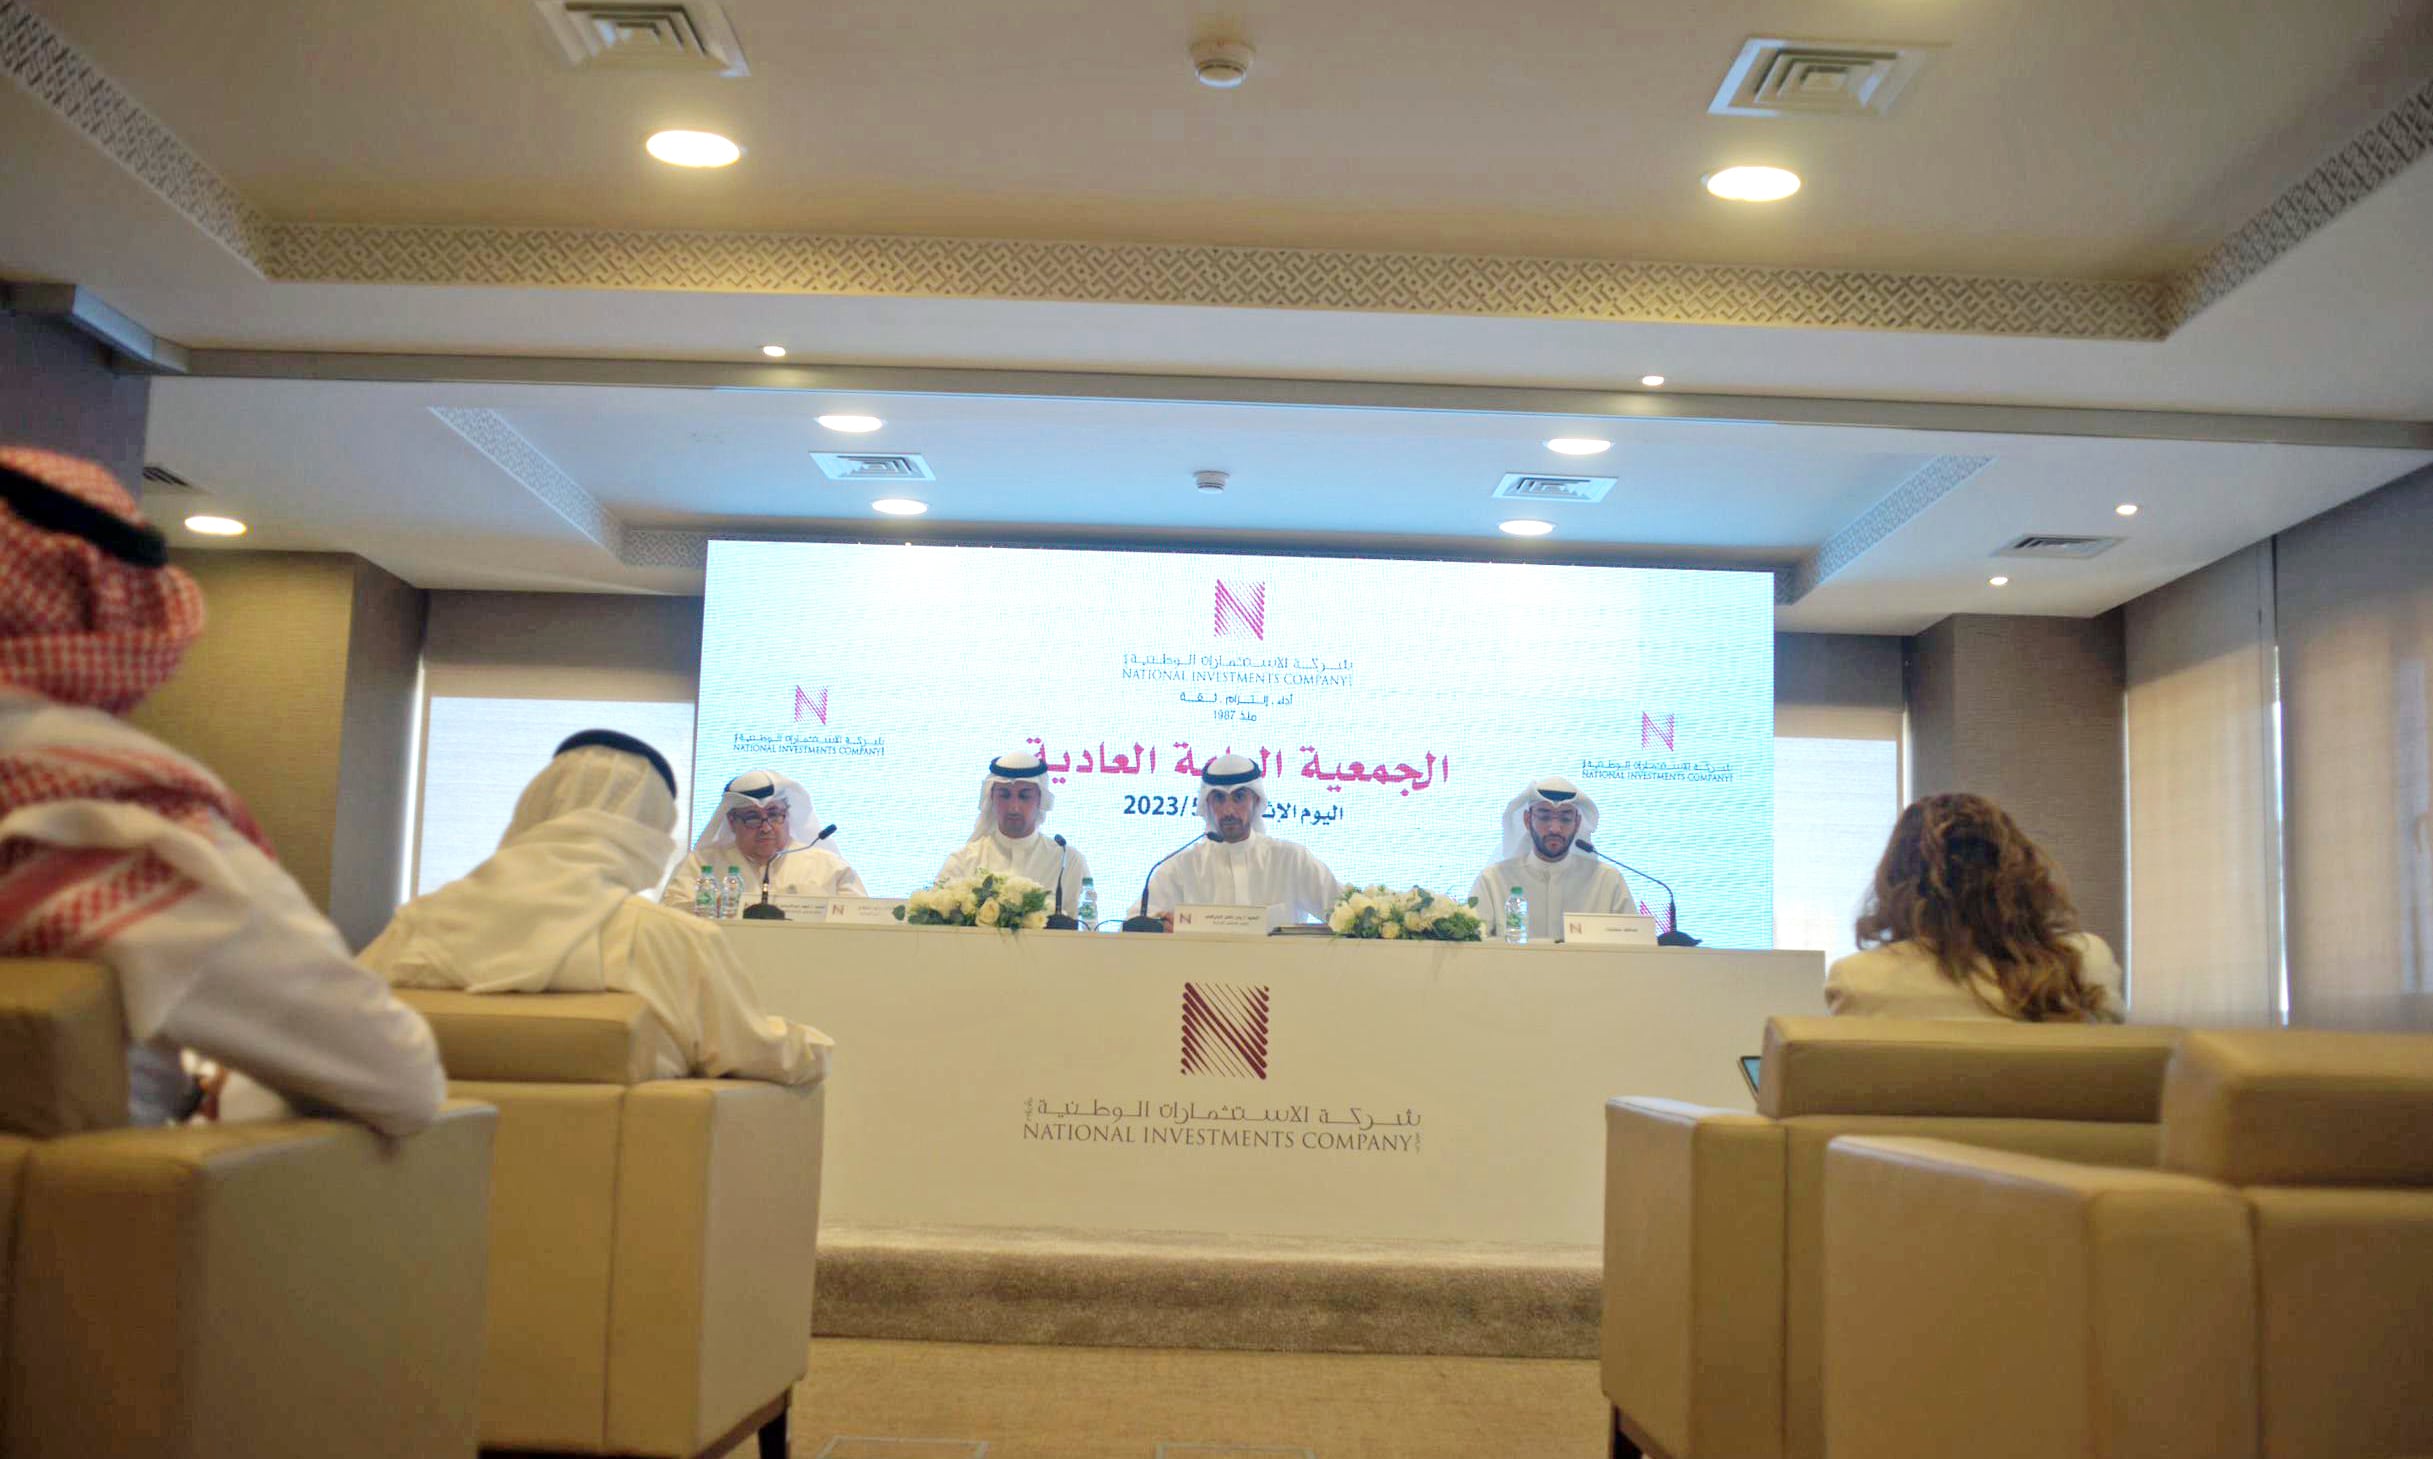 KUWAIT: National Investments Company Chairman Bader Nasser Al-Kharafi addresses the general assembly meeting.